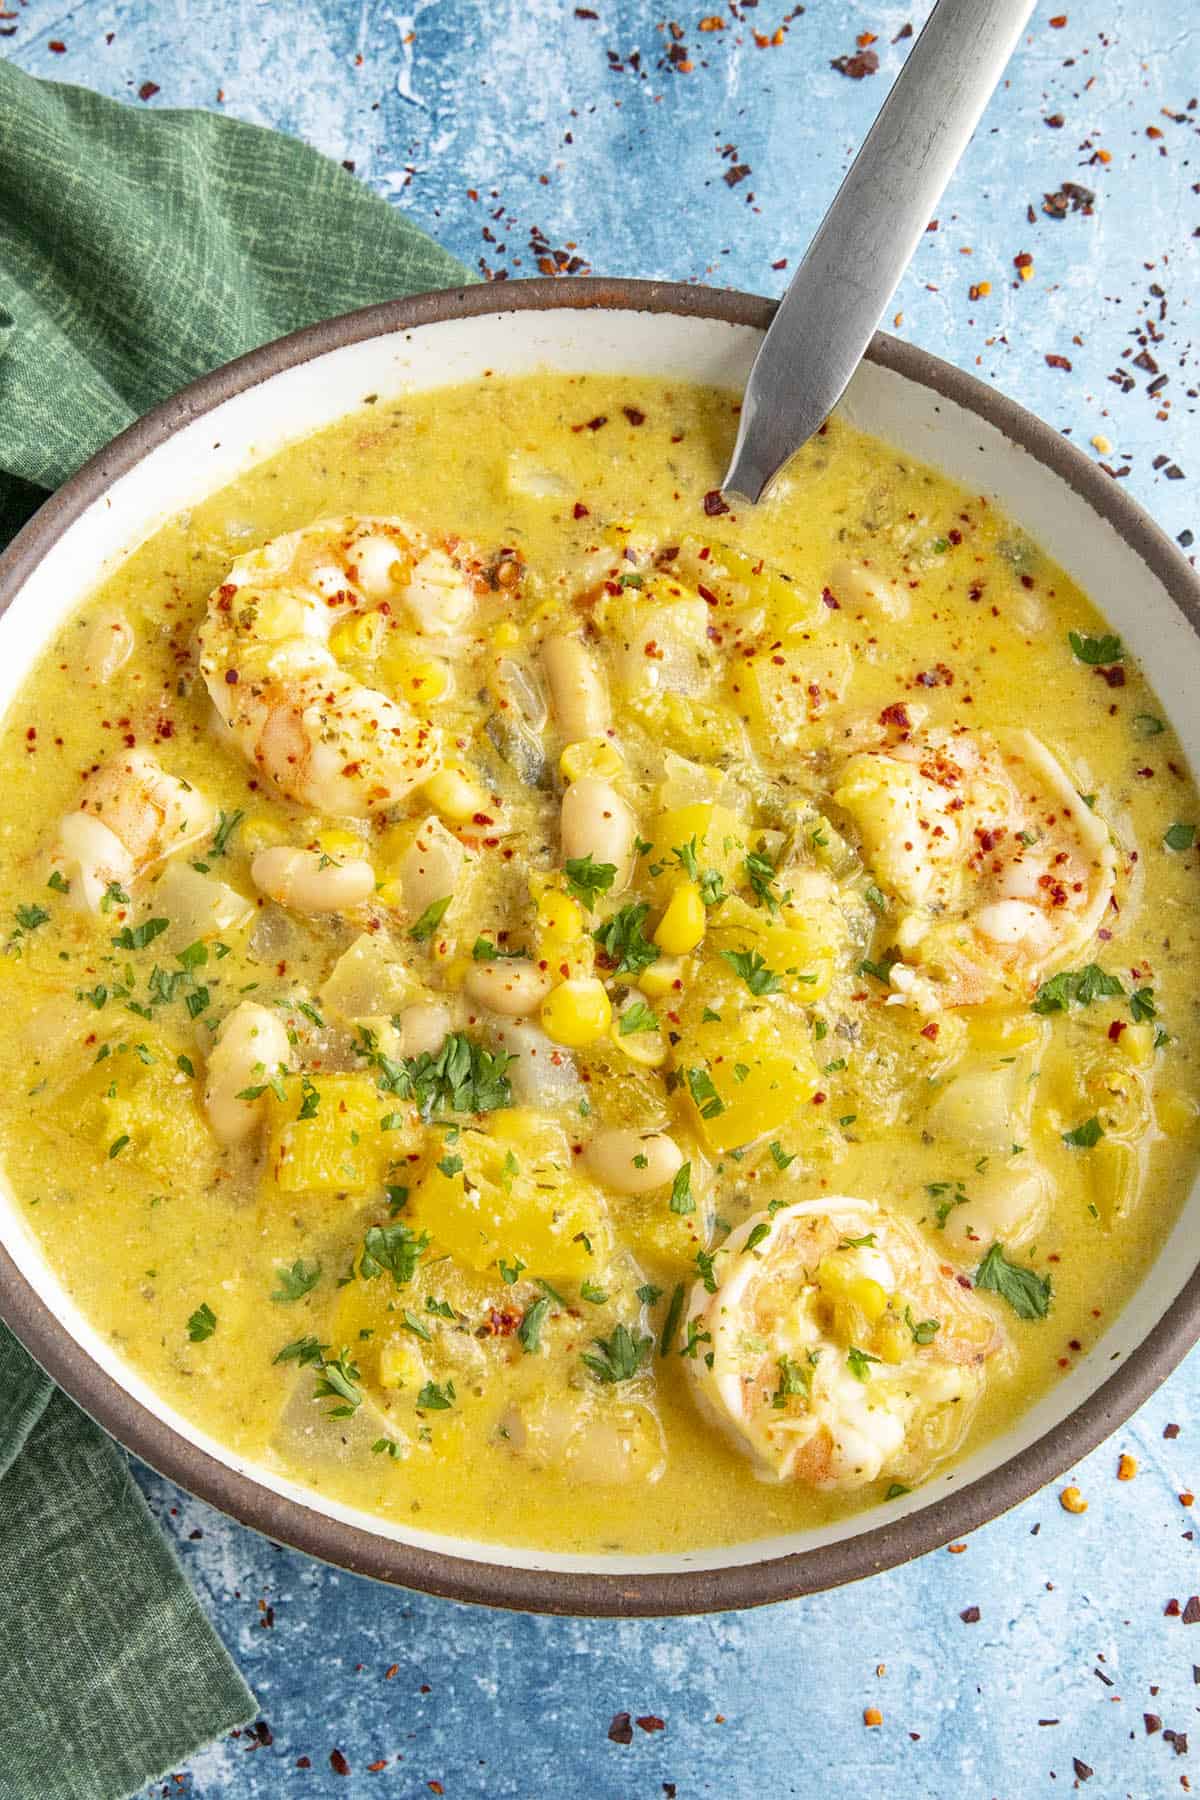 Peruvian Squash Stew with shrimp in a bowl